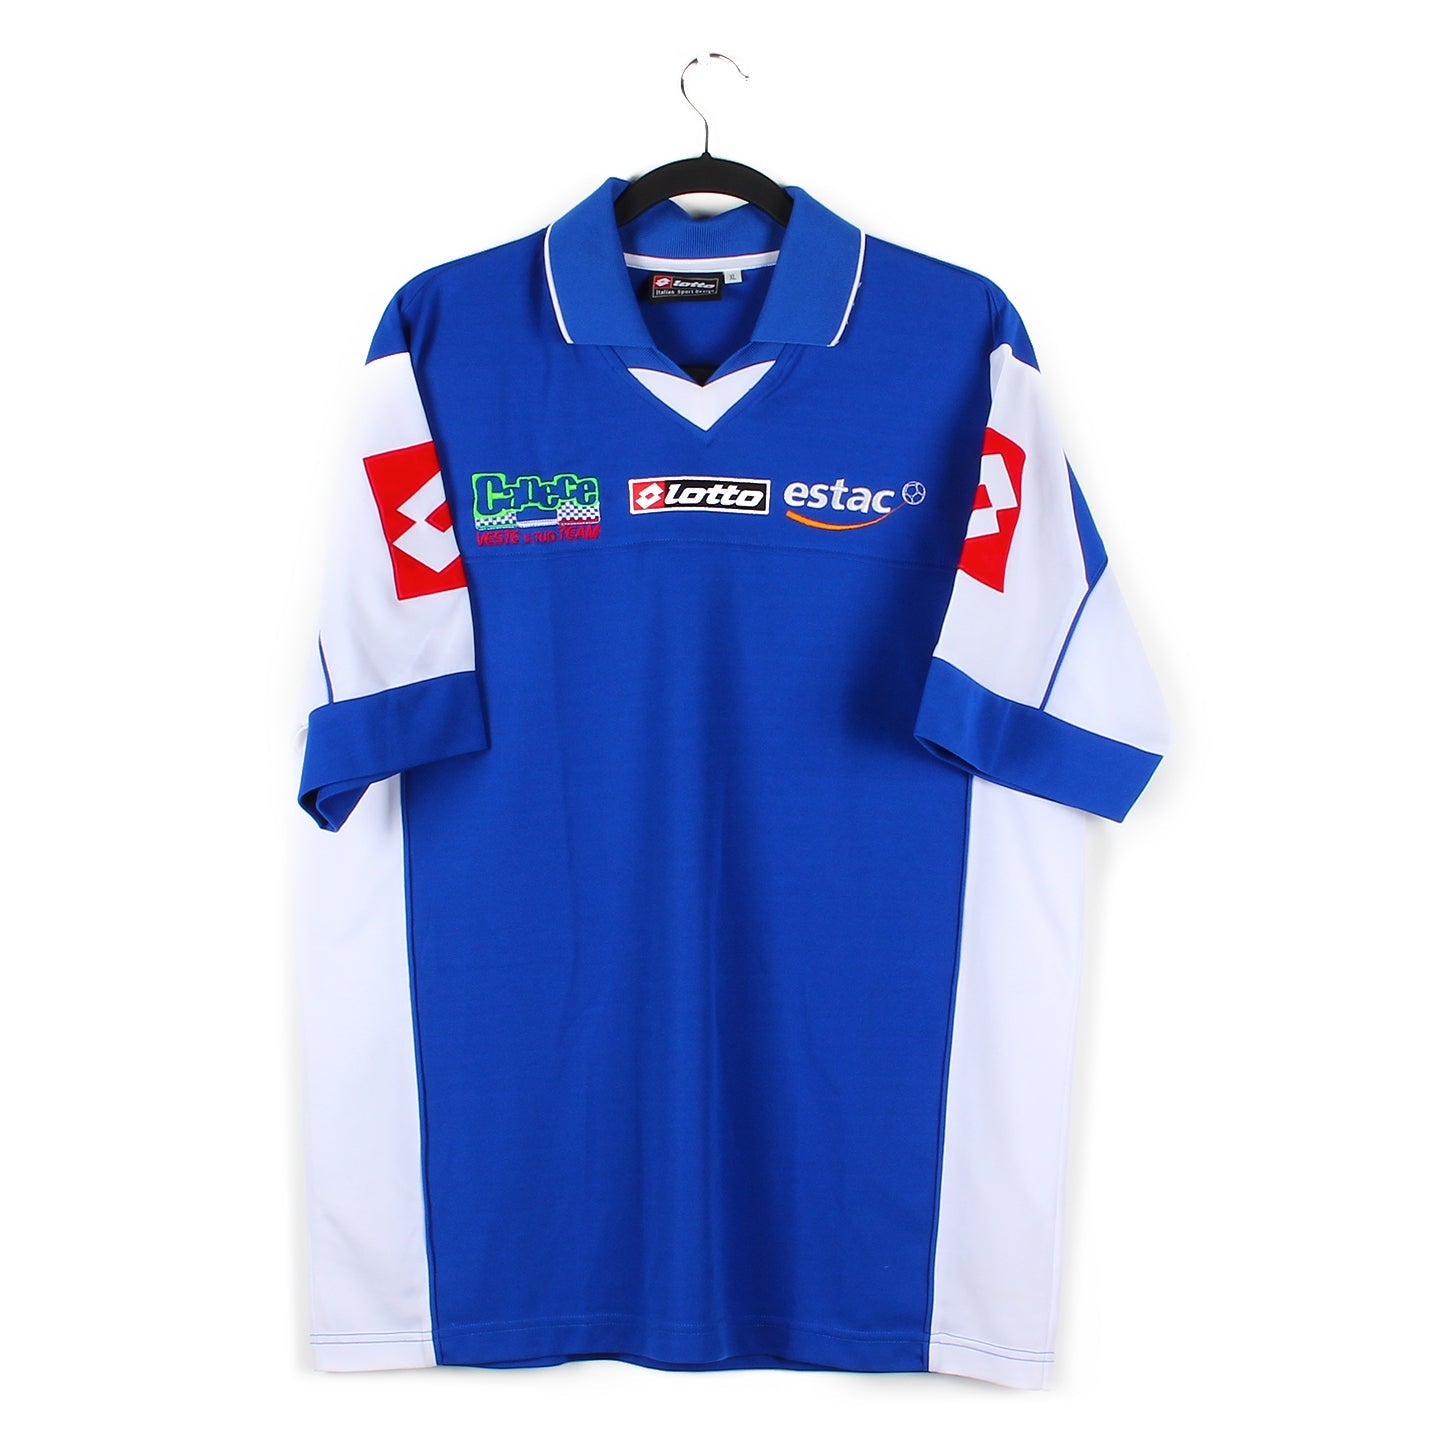 Maillot favori Troyes AC